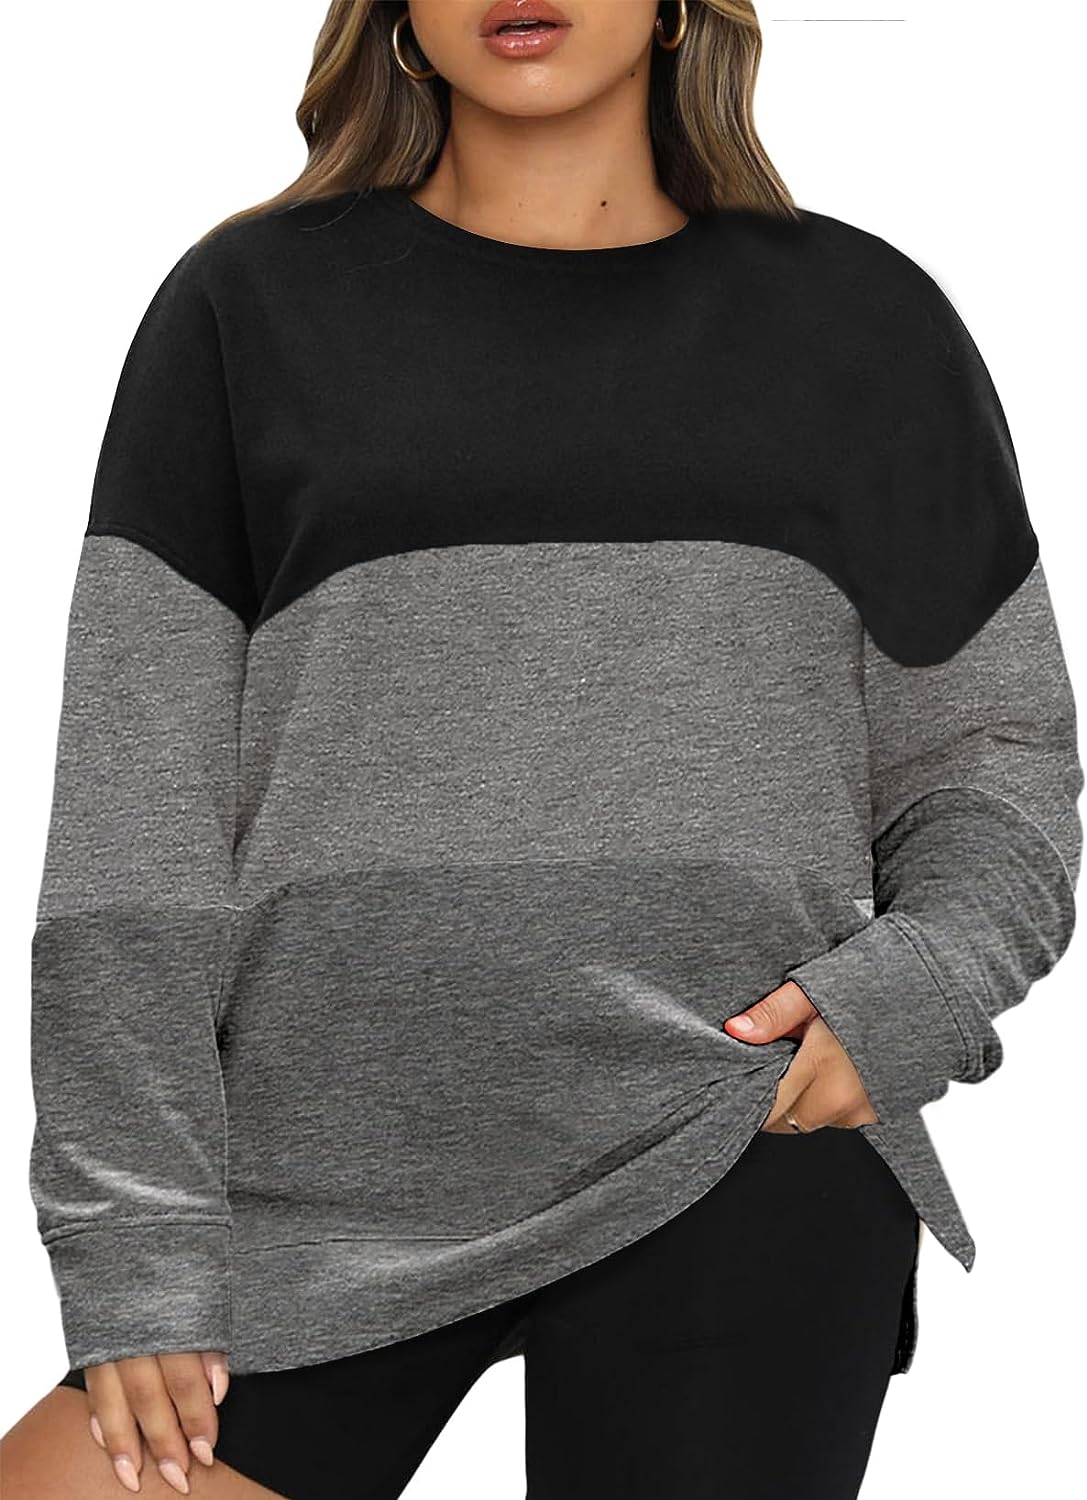 Eytino Women Plus Size Long Sleeve Crewneck Pullovers Sweatshirts Tops Fall  2023 Trendy Clothes,1X Black at  Women's Clothing store